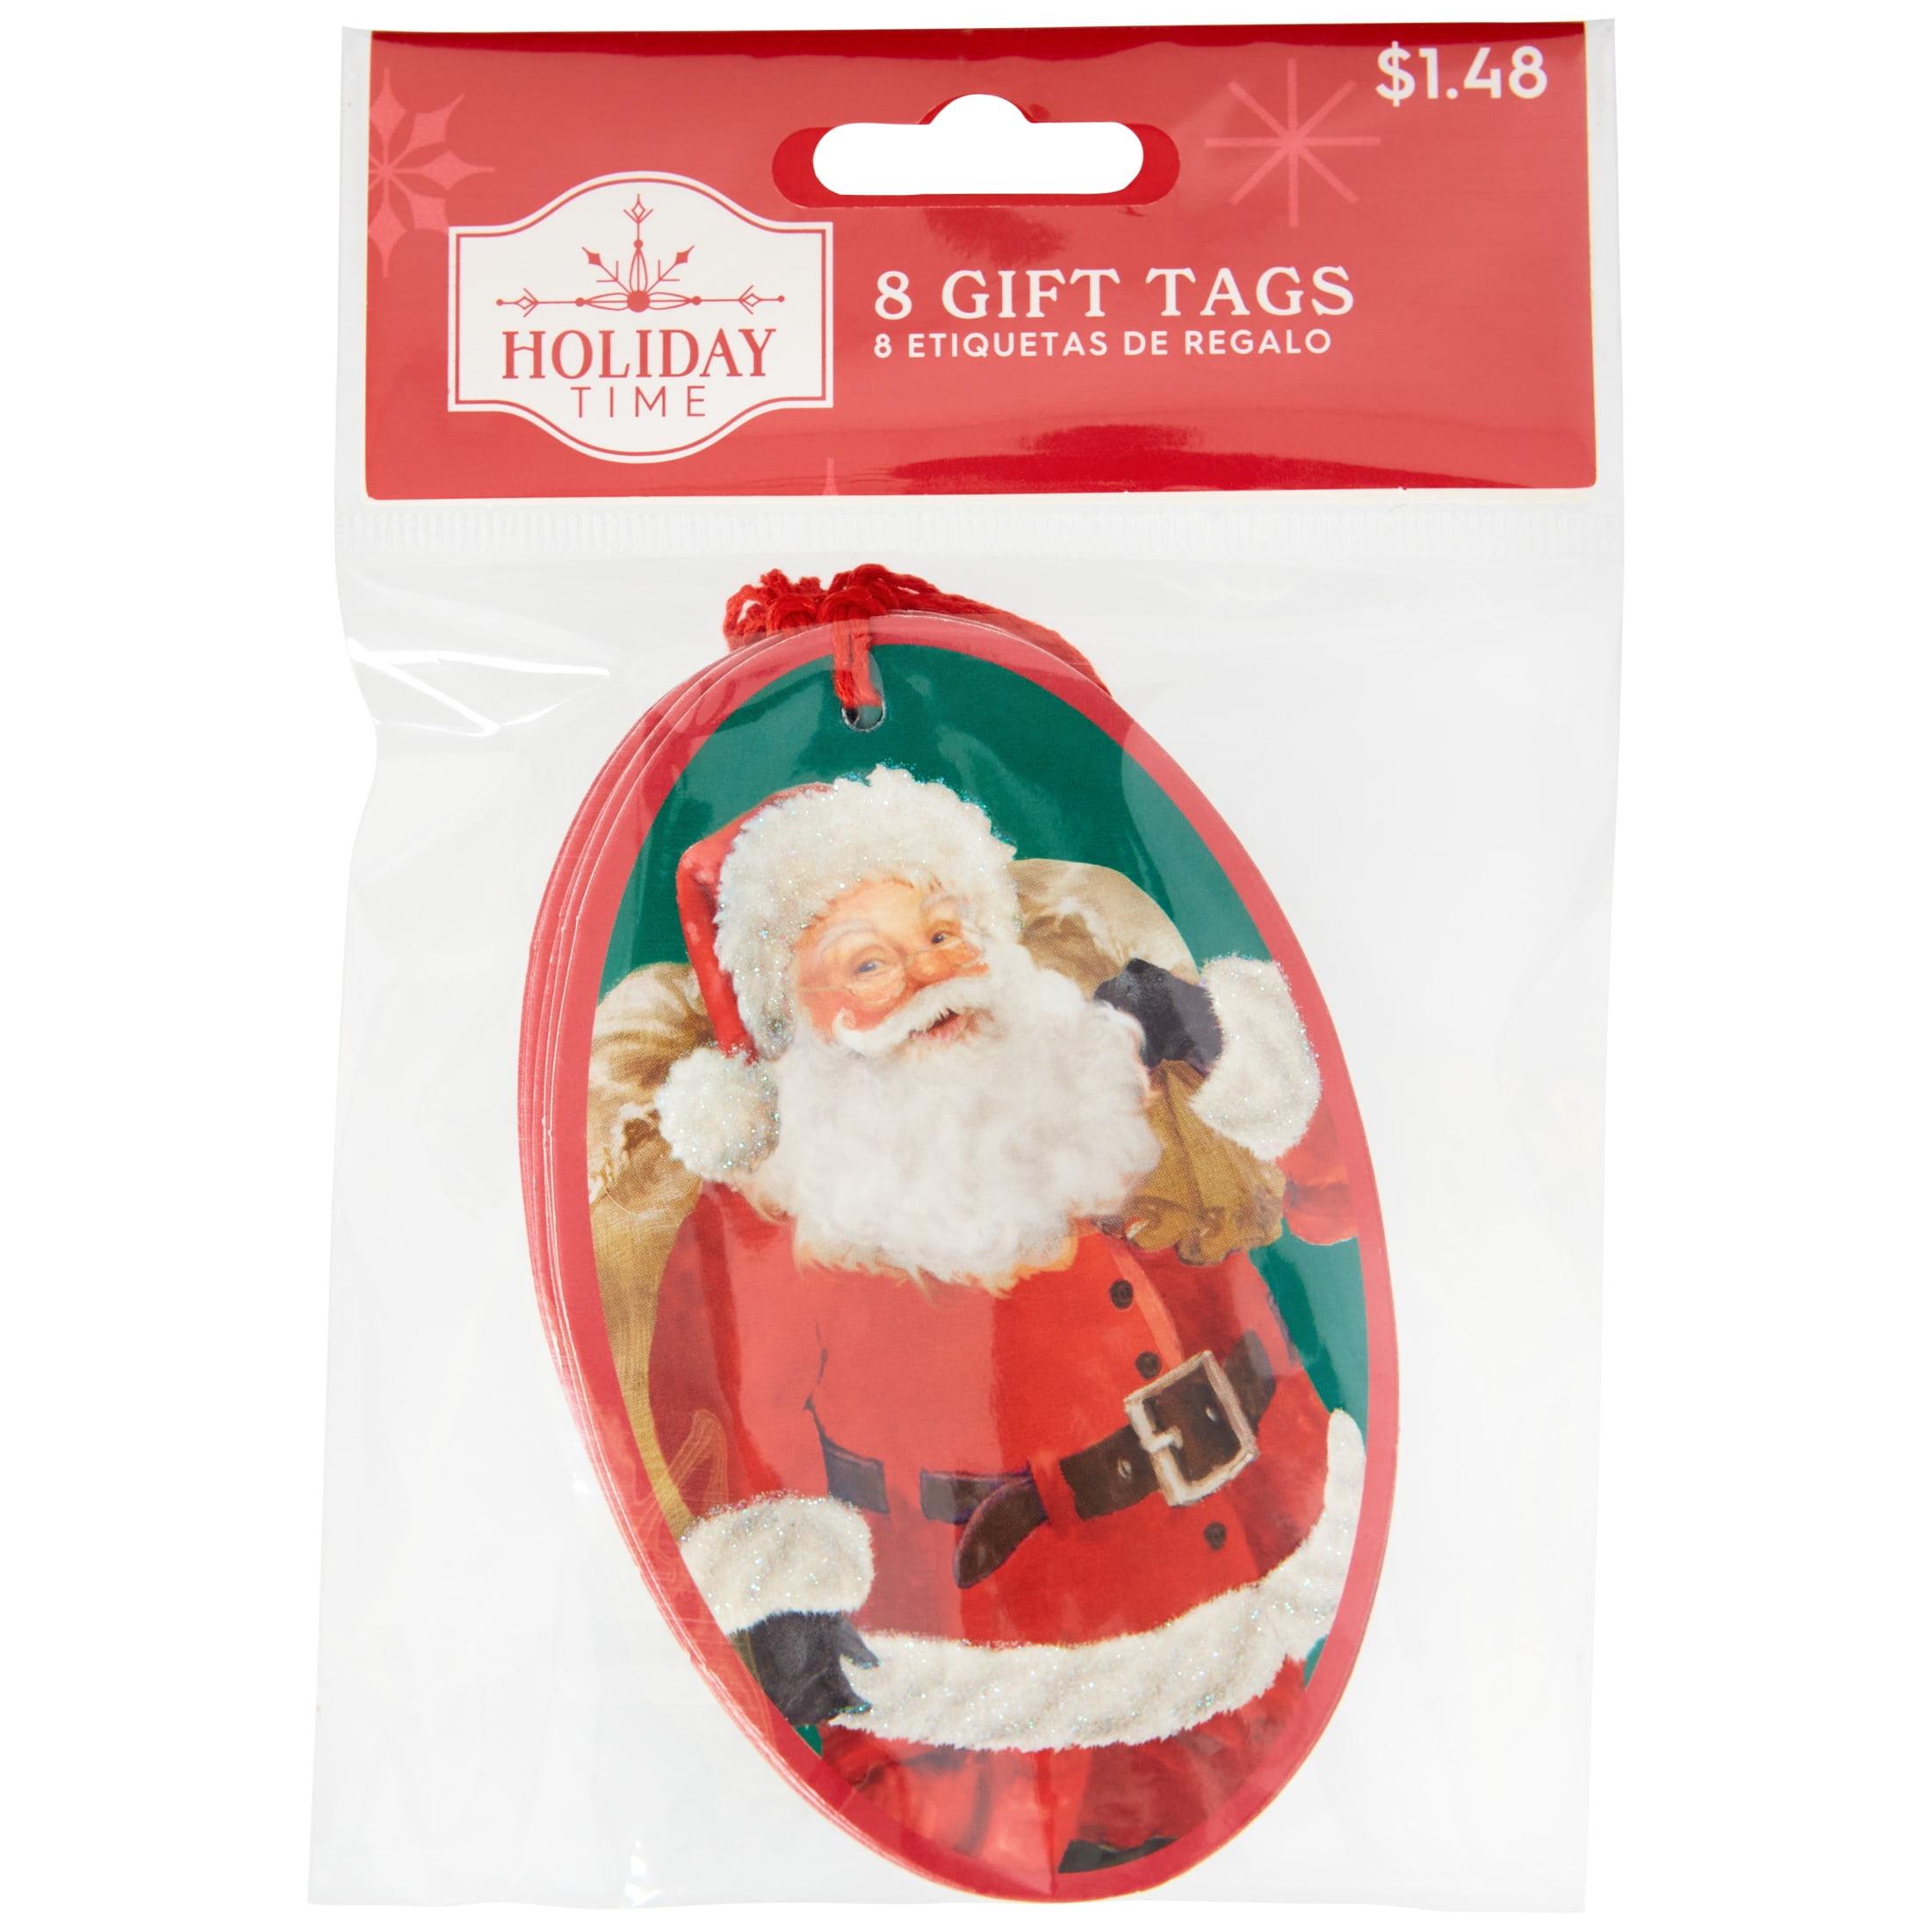 Holiday Time Classic Santa Paper Gift Tags, Red, Iridescent Glitter, 2.5" x 4", 8 Count